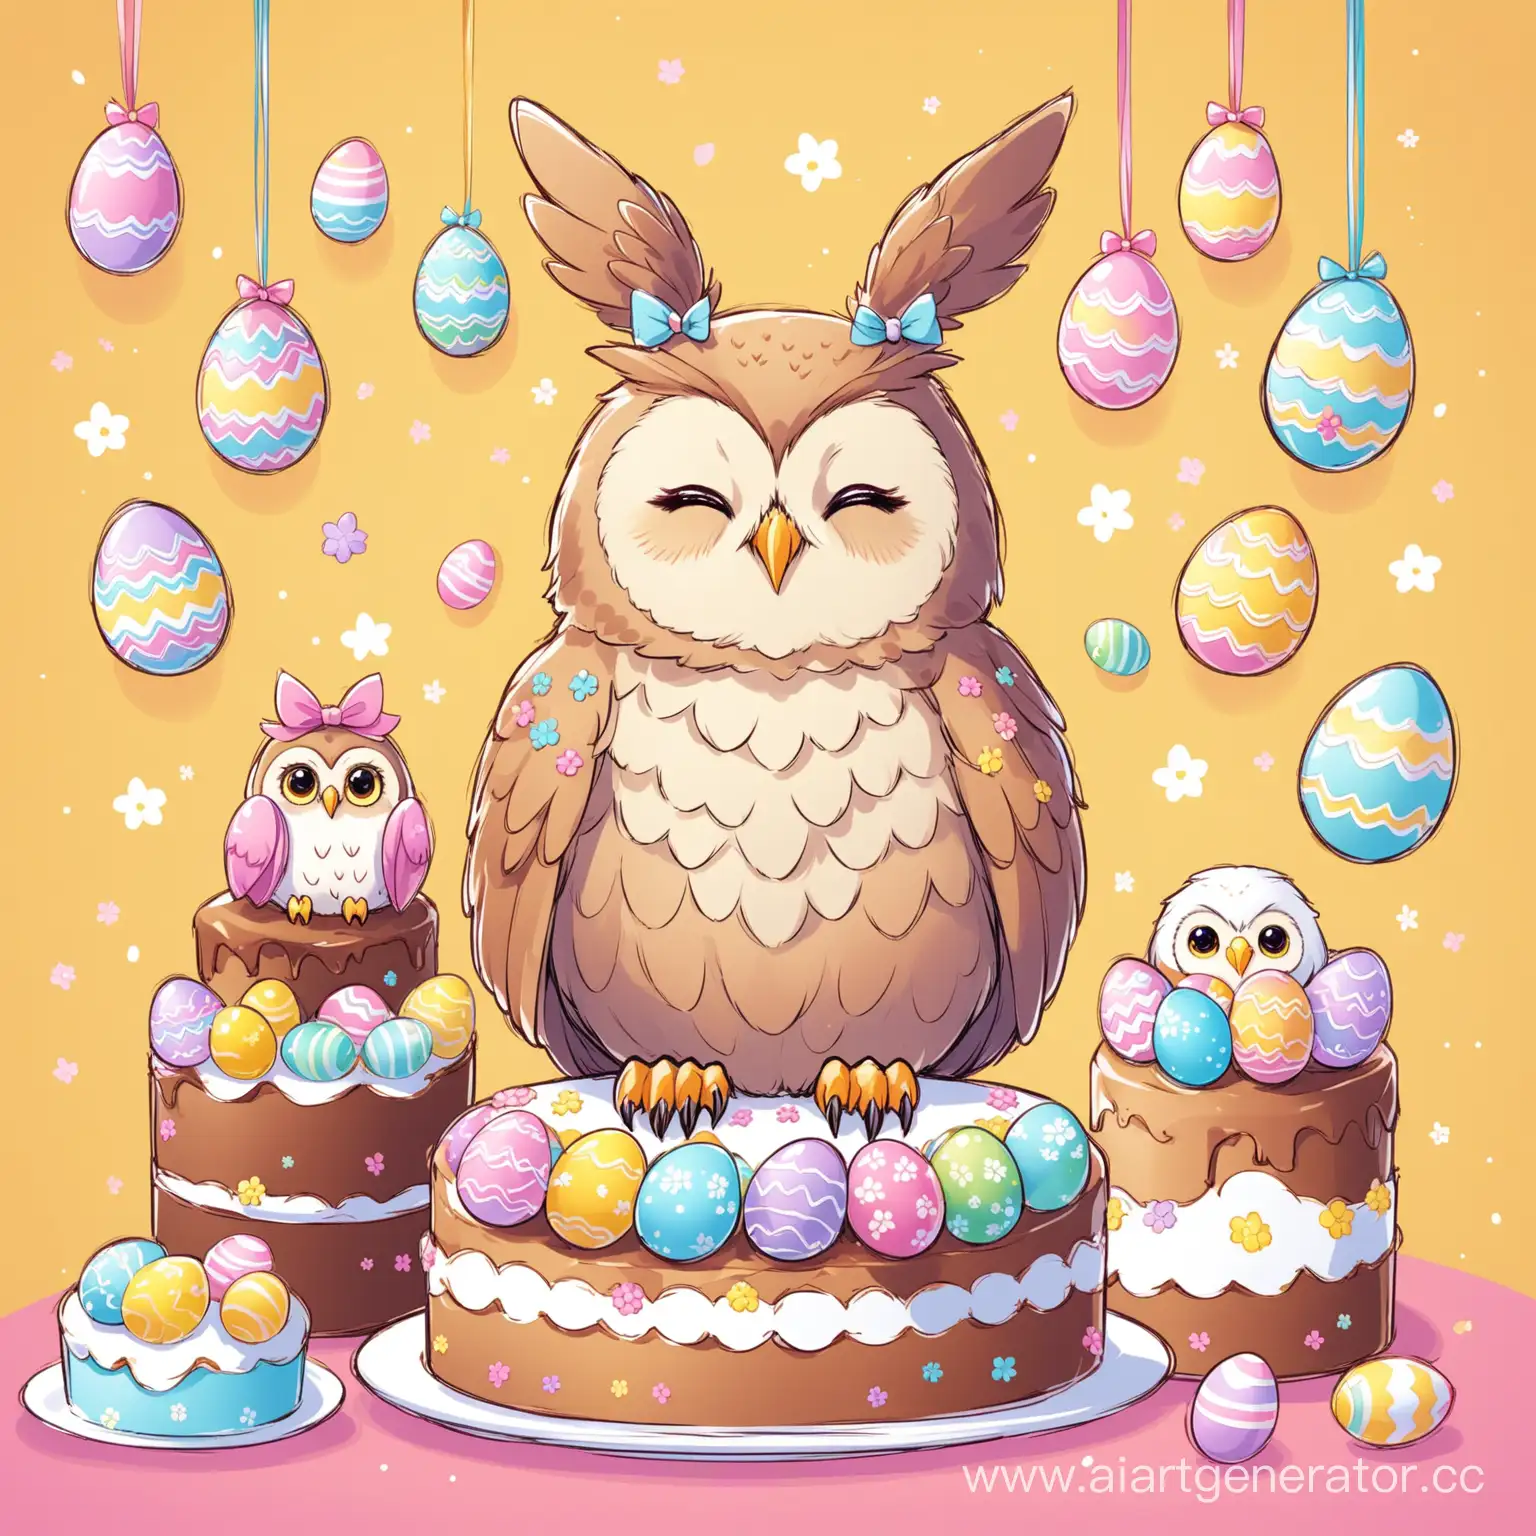 Joyful-OwlPerson-Celebrating-Easter-with-Cakes-and-Eggs